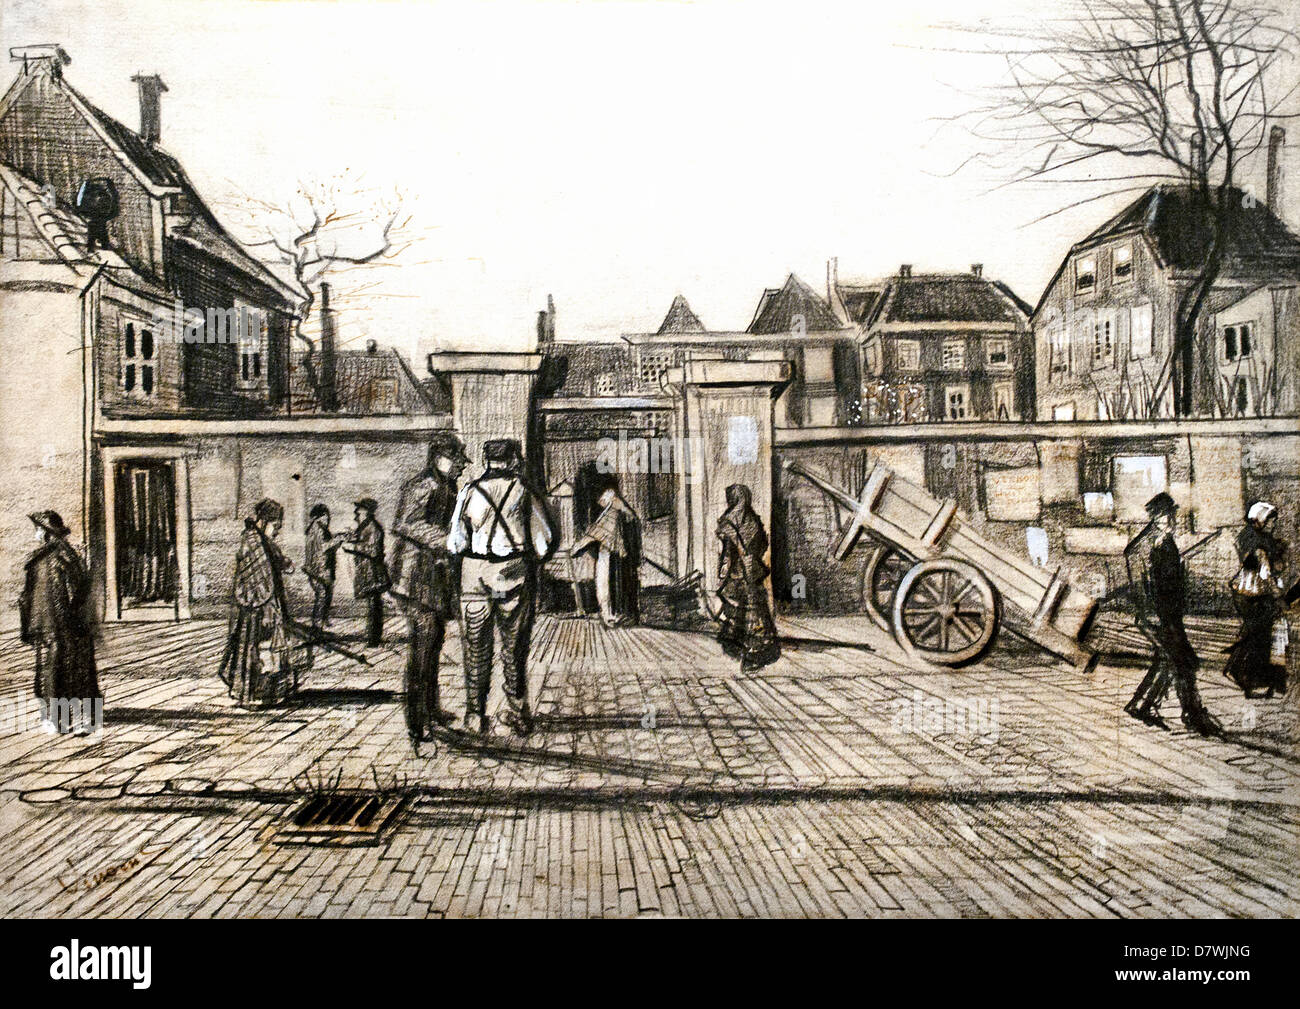 The entrance to the Pawn Bank 1882 Vincent van Gogh 1853 - 1890  Dutch Netherlands Stock Photo